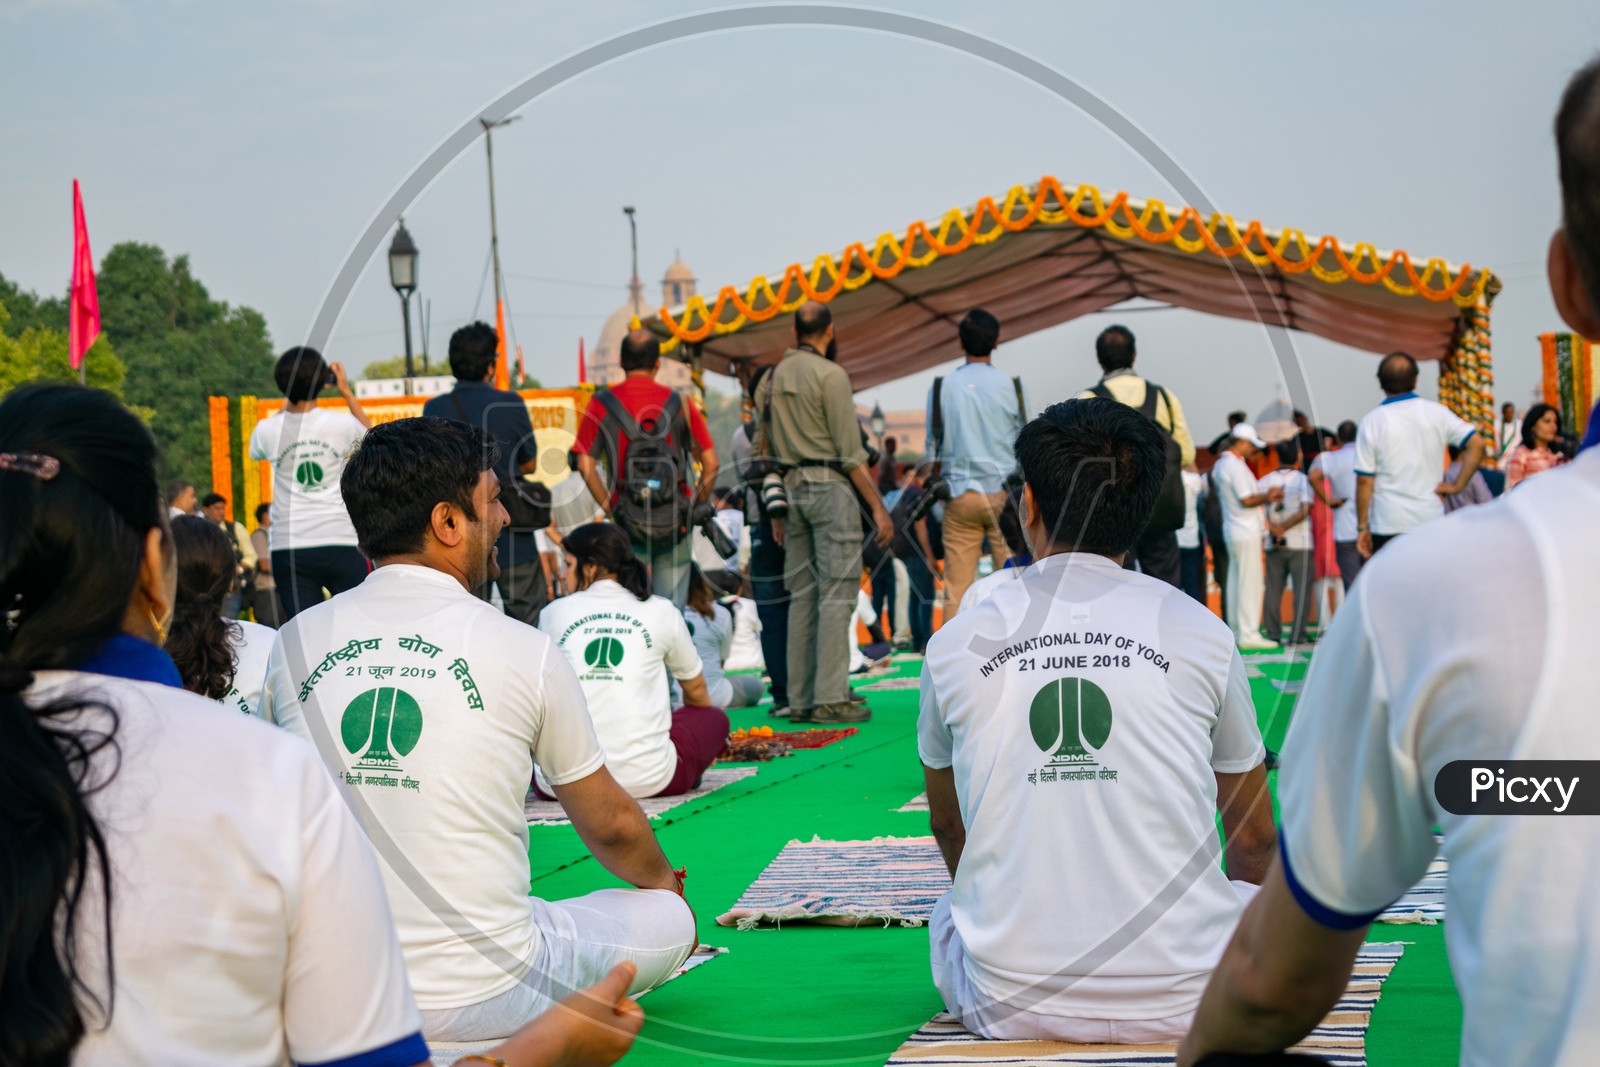 People wearing t-shirts of International Day of Yoga, 2019